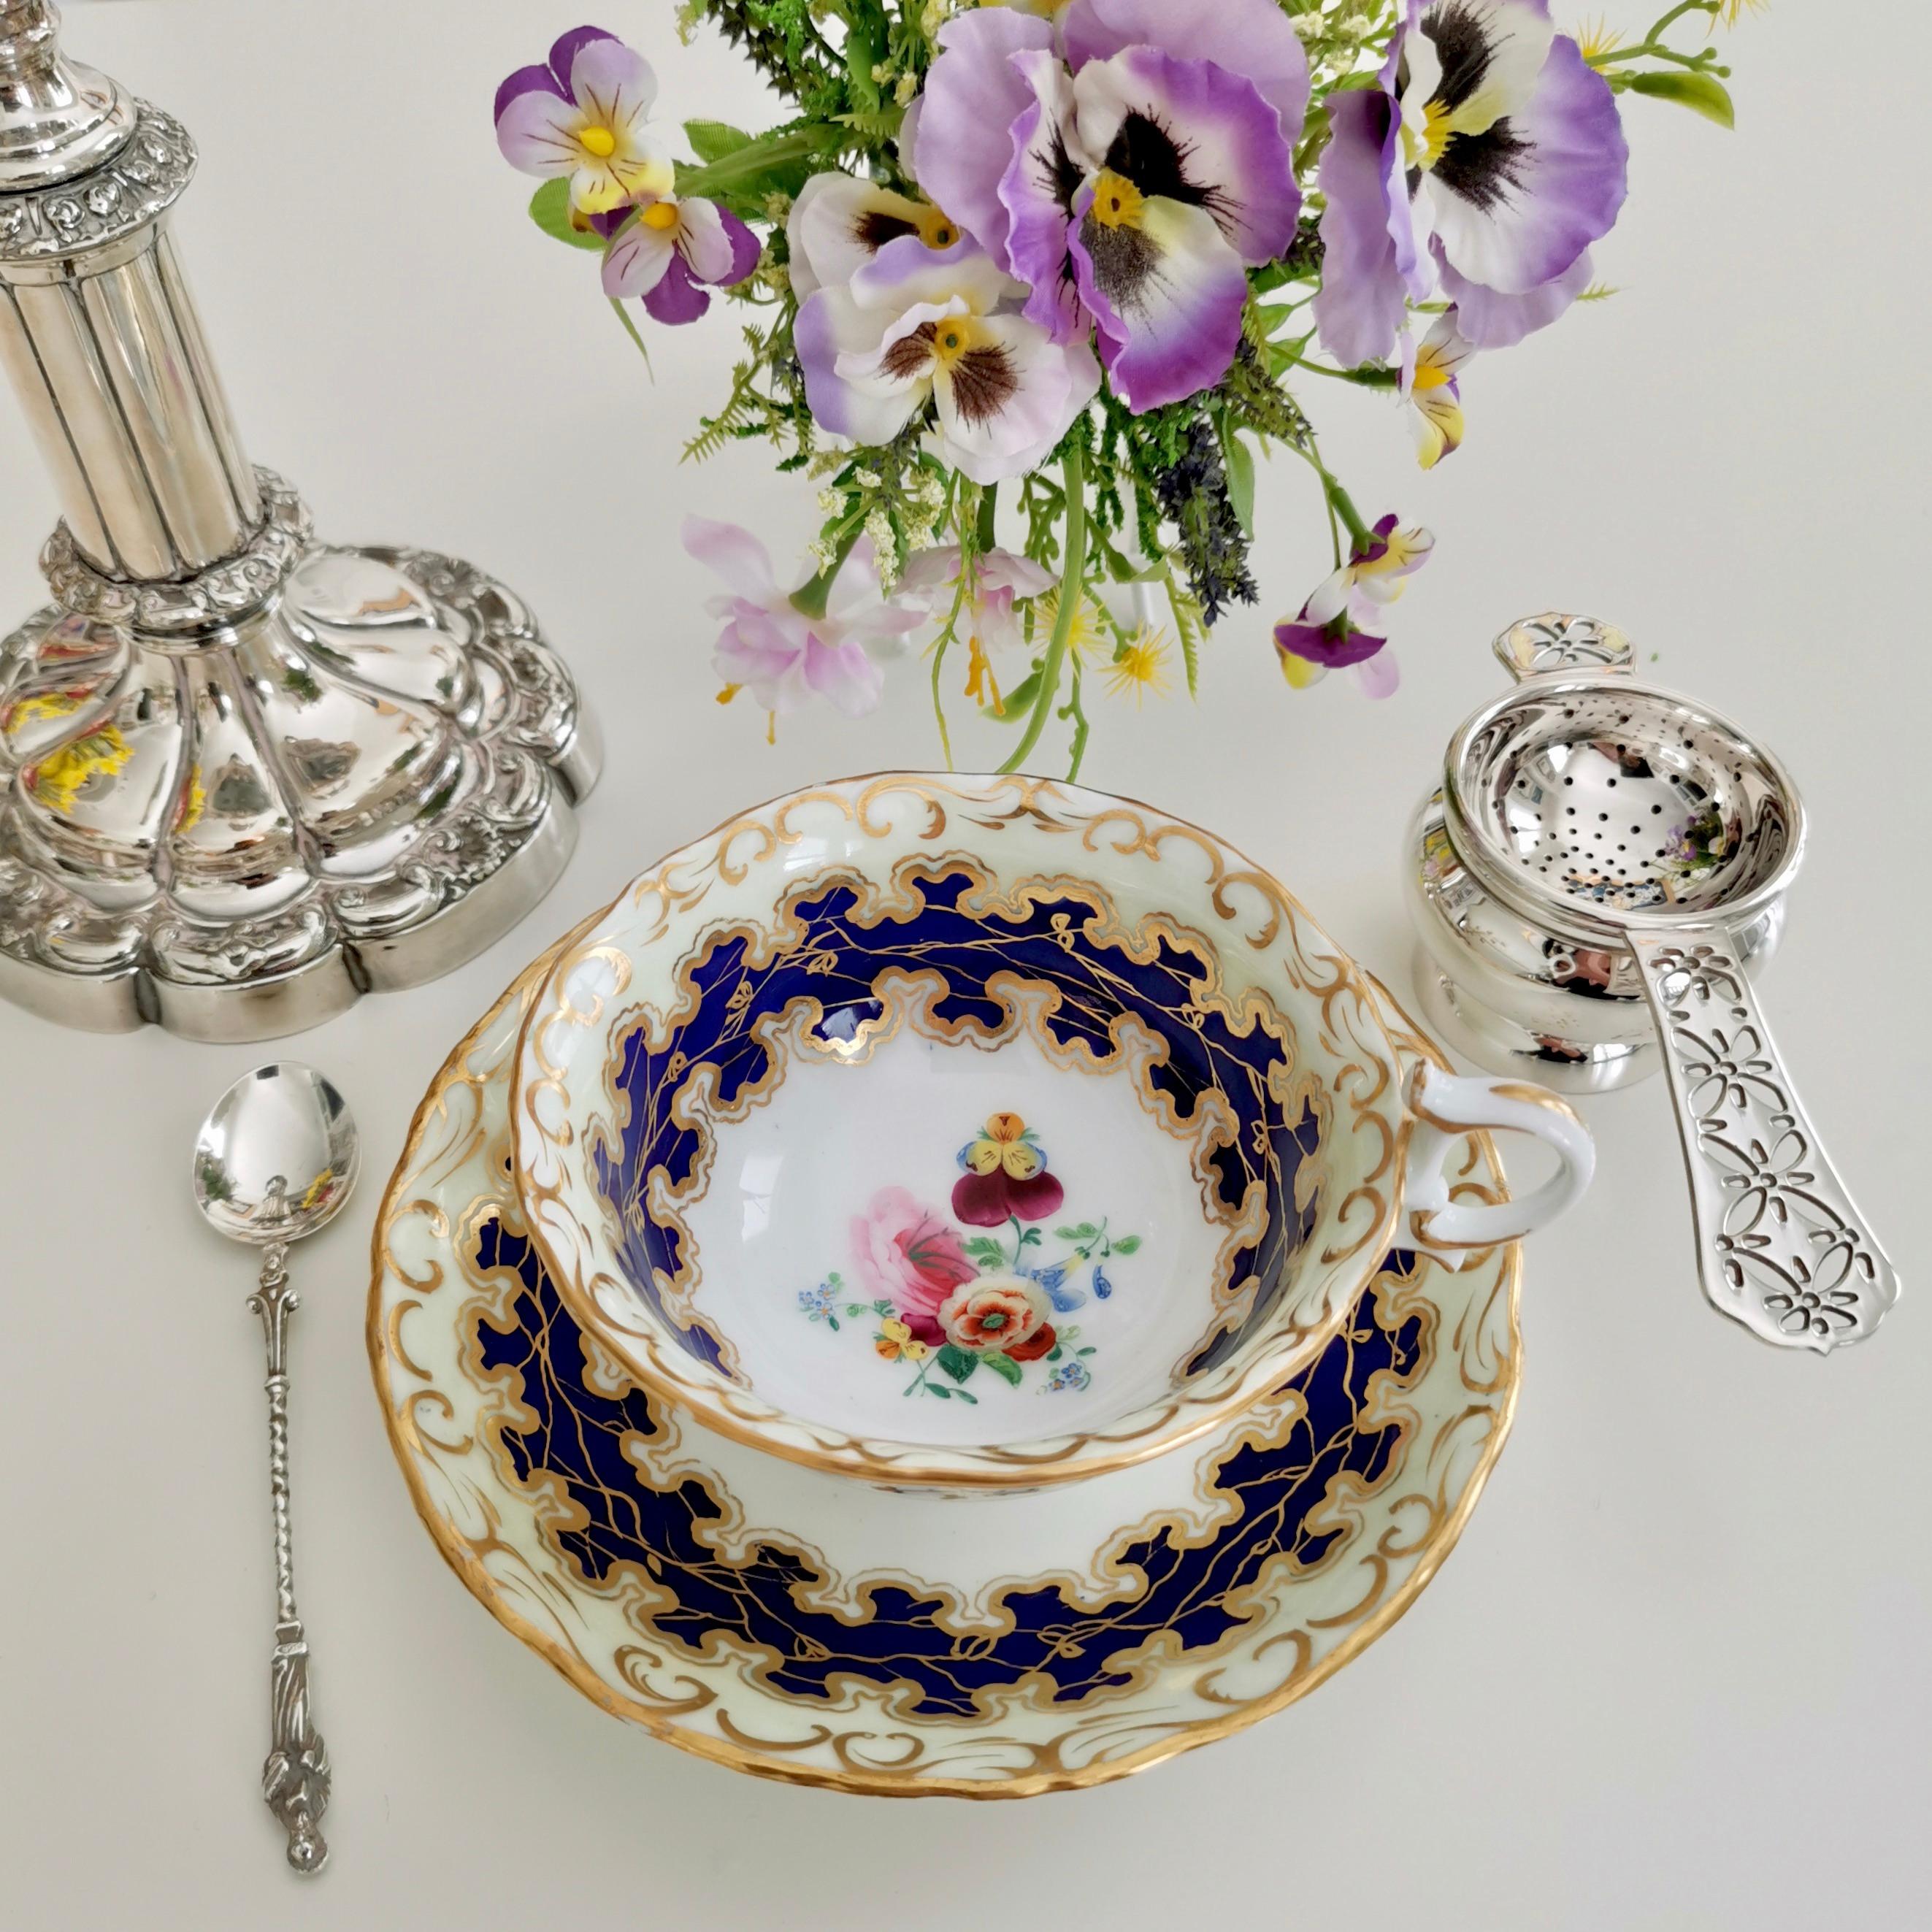 This is a gorgeous teacup and saucer produced by Grainger in Worcester, circa 1840.

Grainger was one of the leading factories in Worcester in the 19th century. It was founded by Thomas Grainger, an apprentice of the Chamberlains Worcester